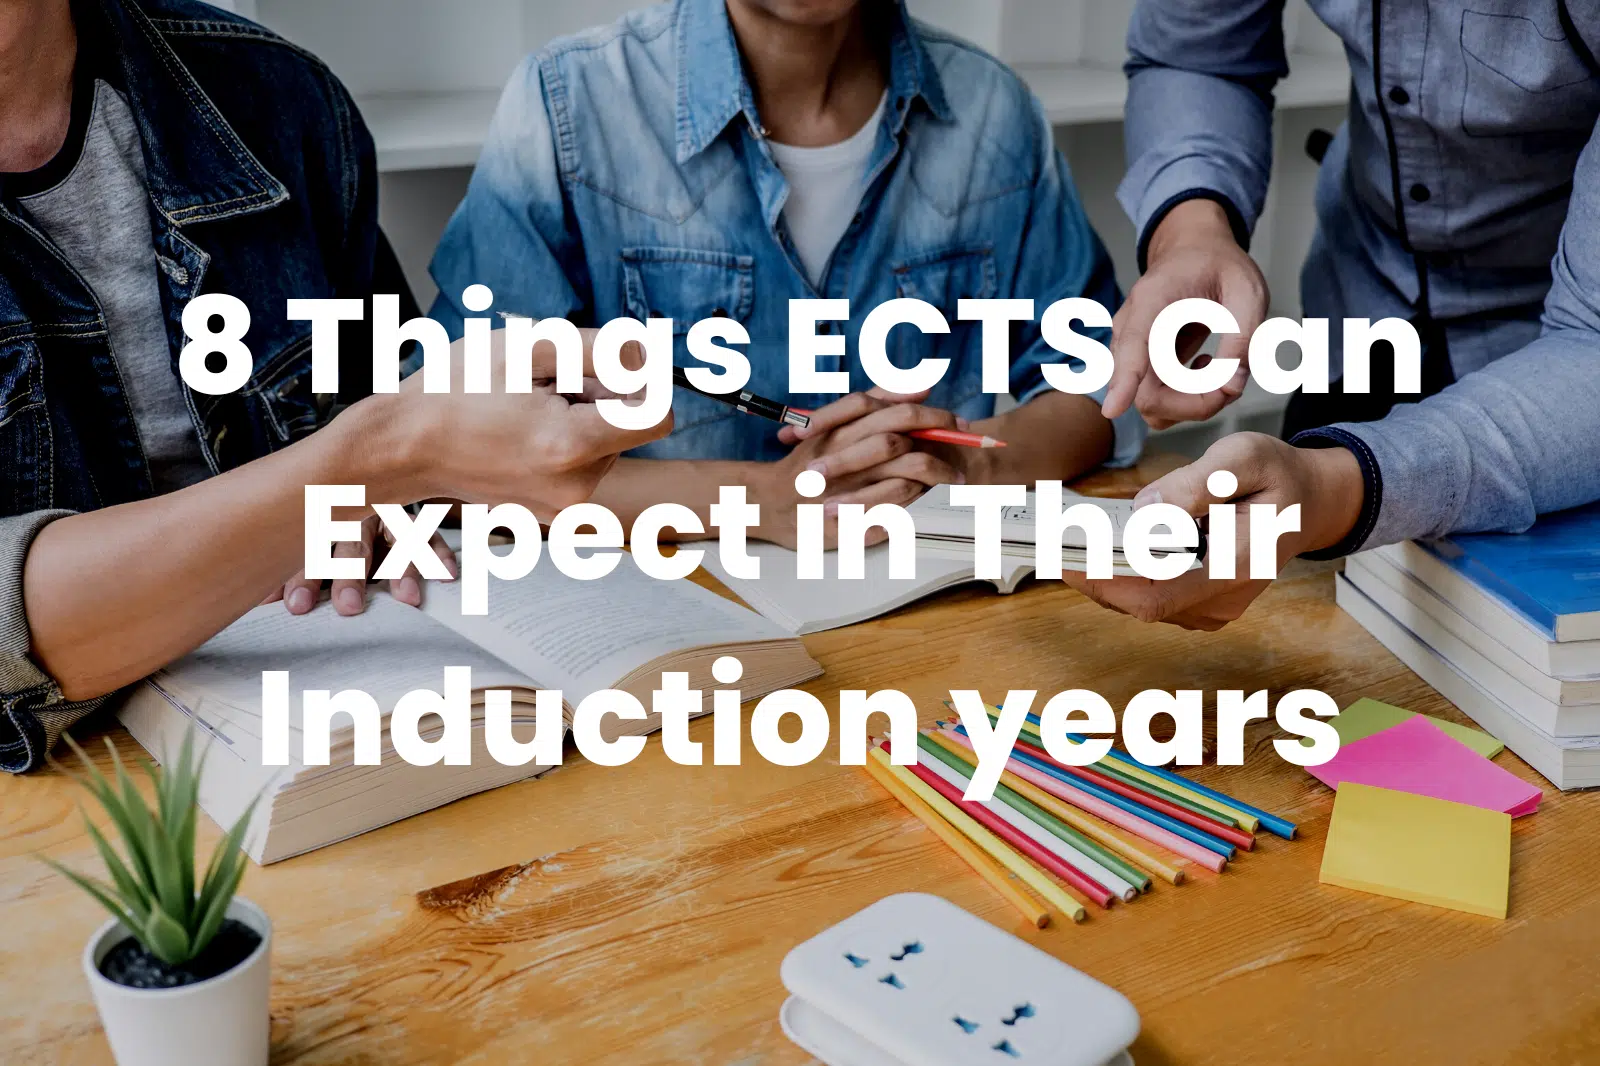 ECTs Can Expect